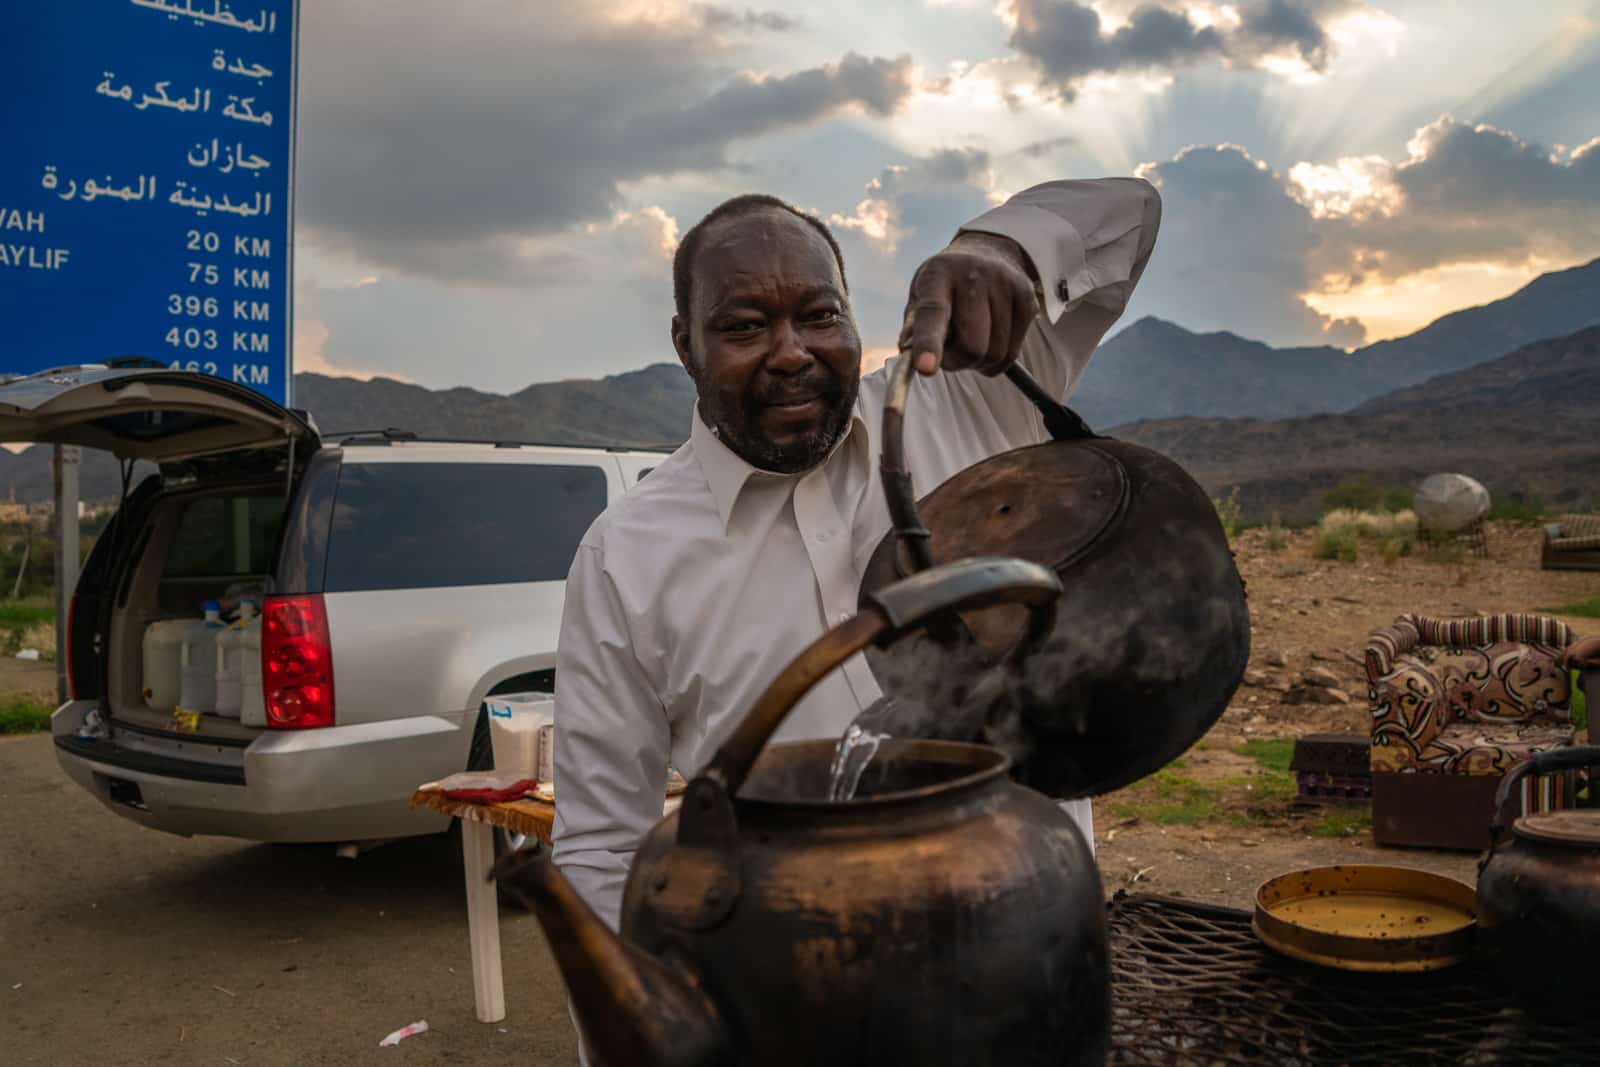 Man pouring hot water for tea on the roadside in Saudi Arabia